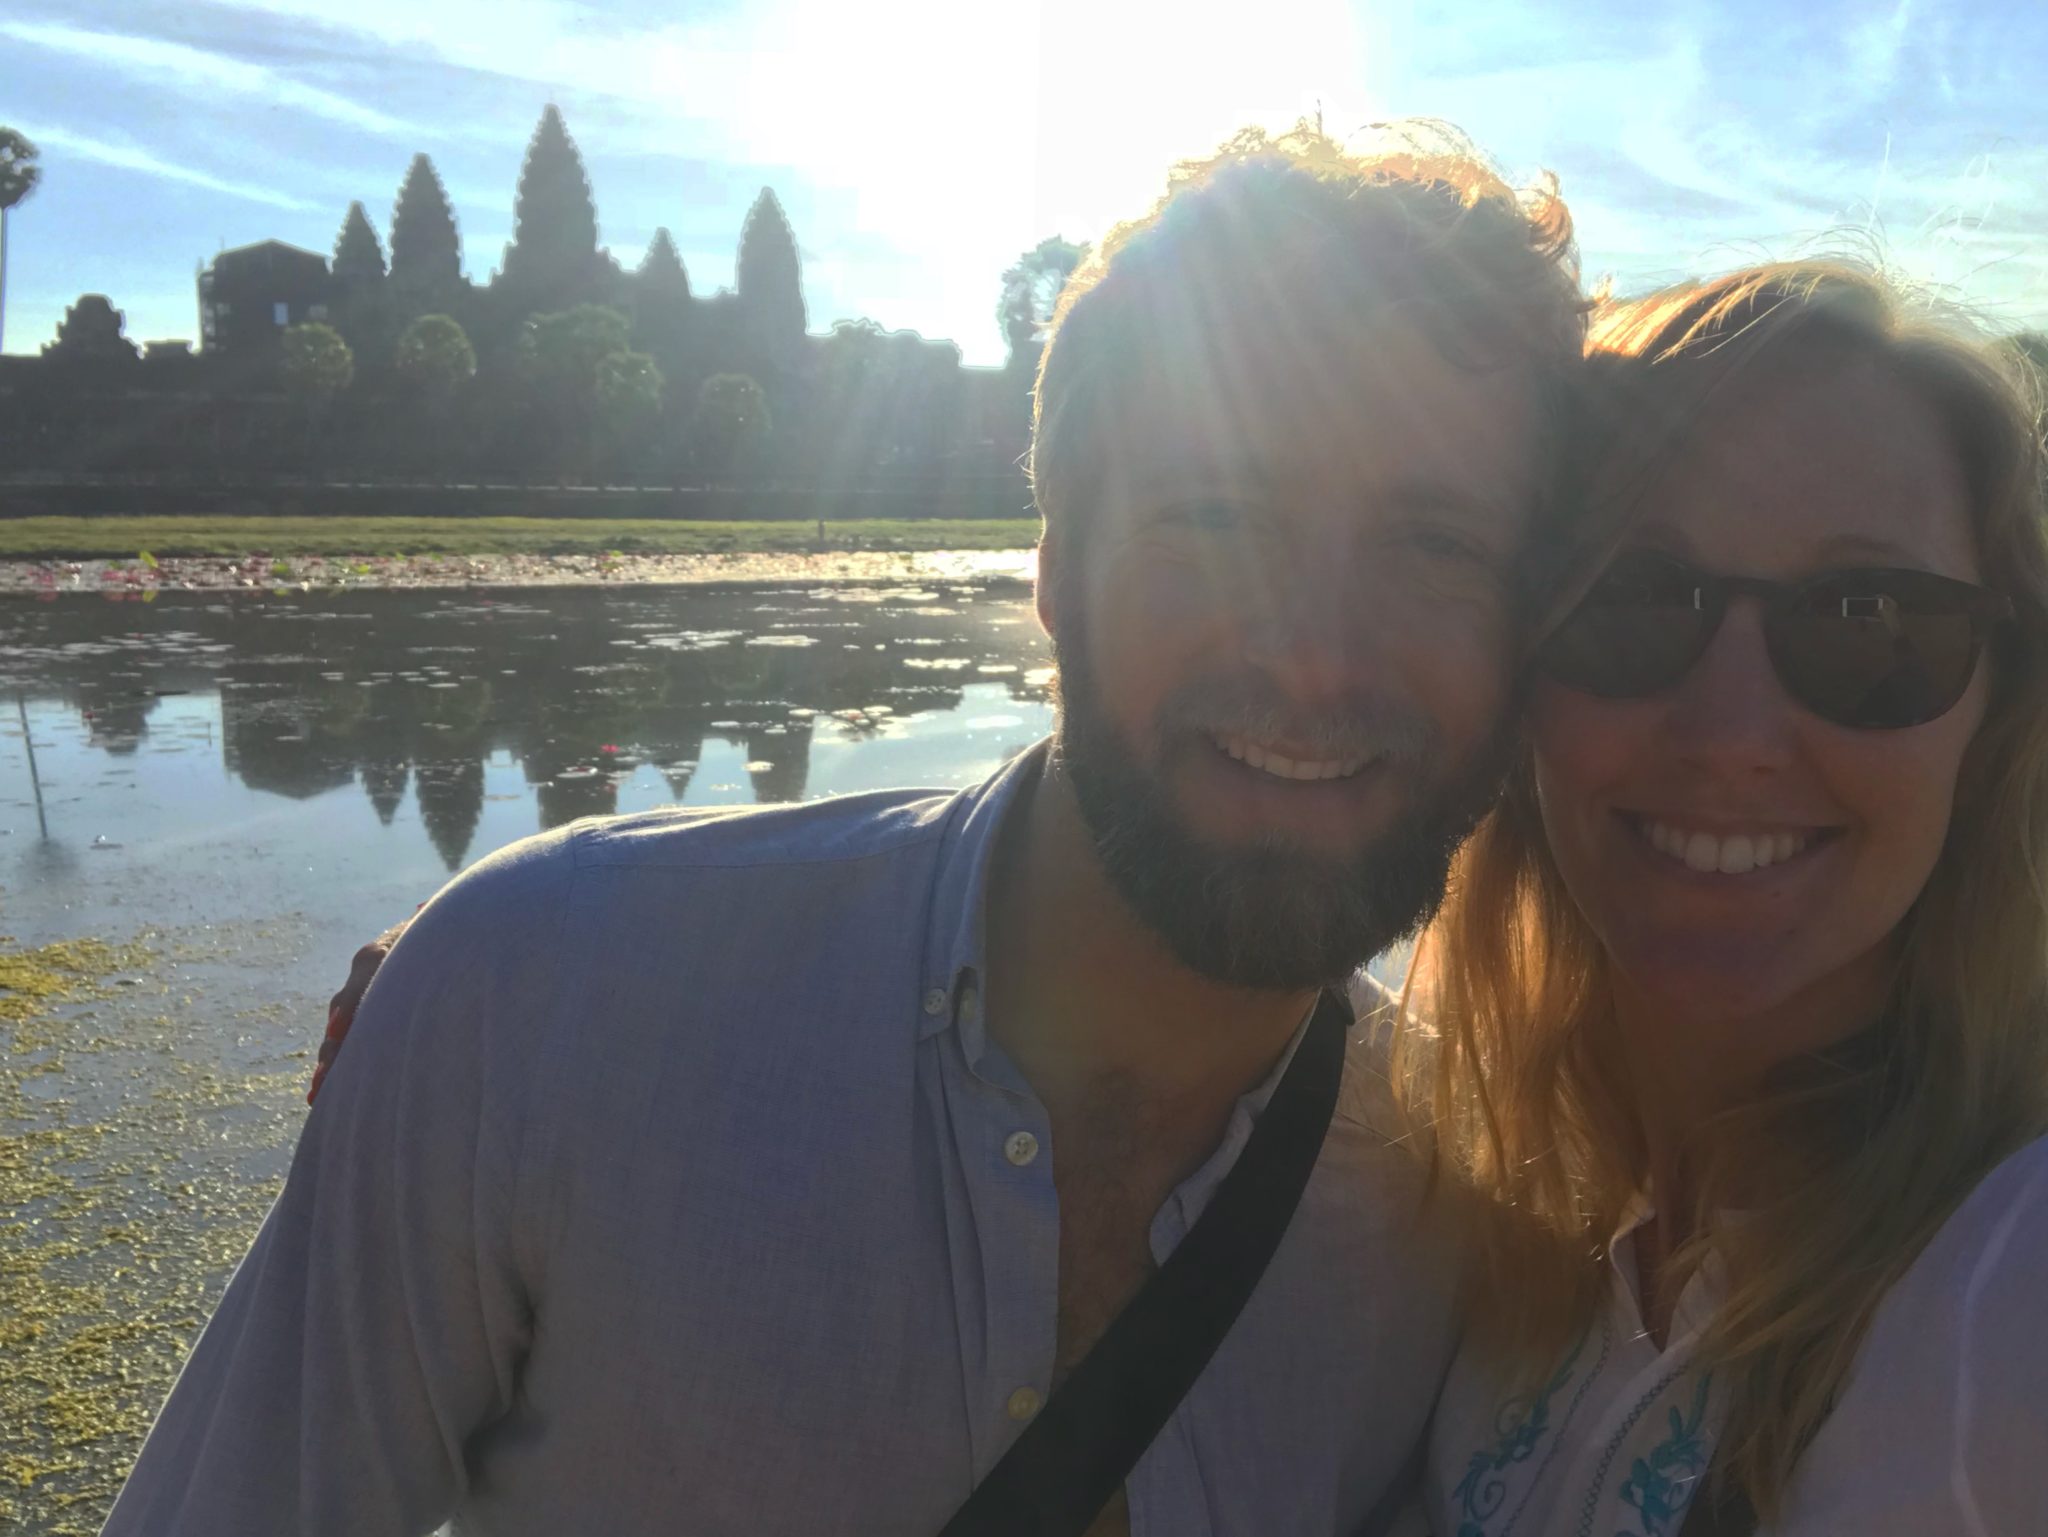 standing in front of Angkor Wat at sunrise 